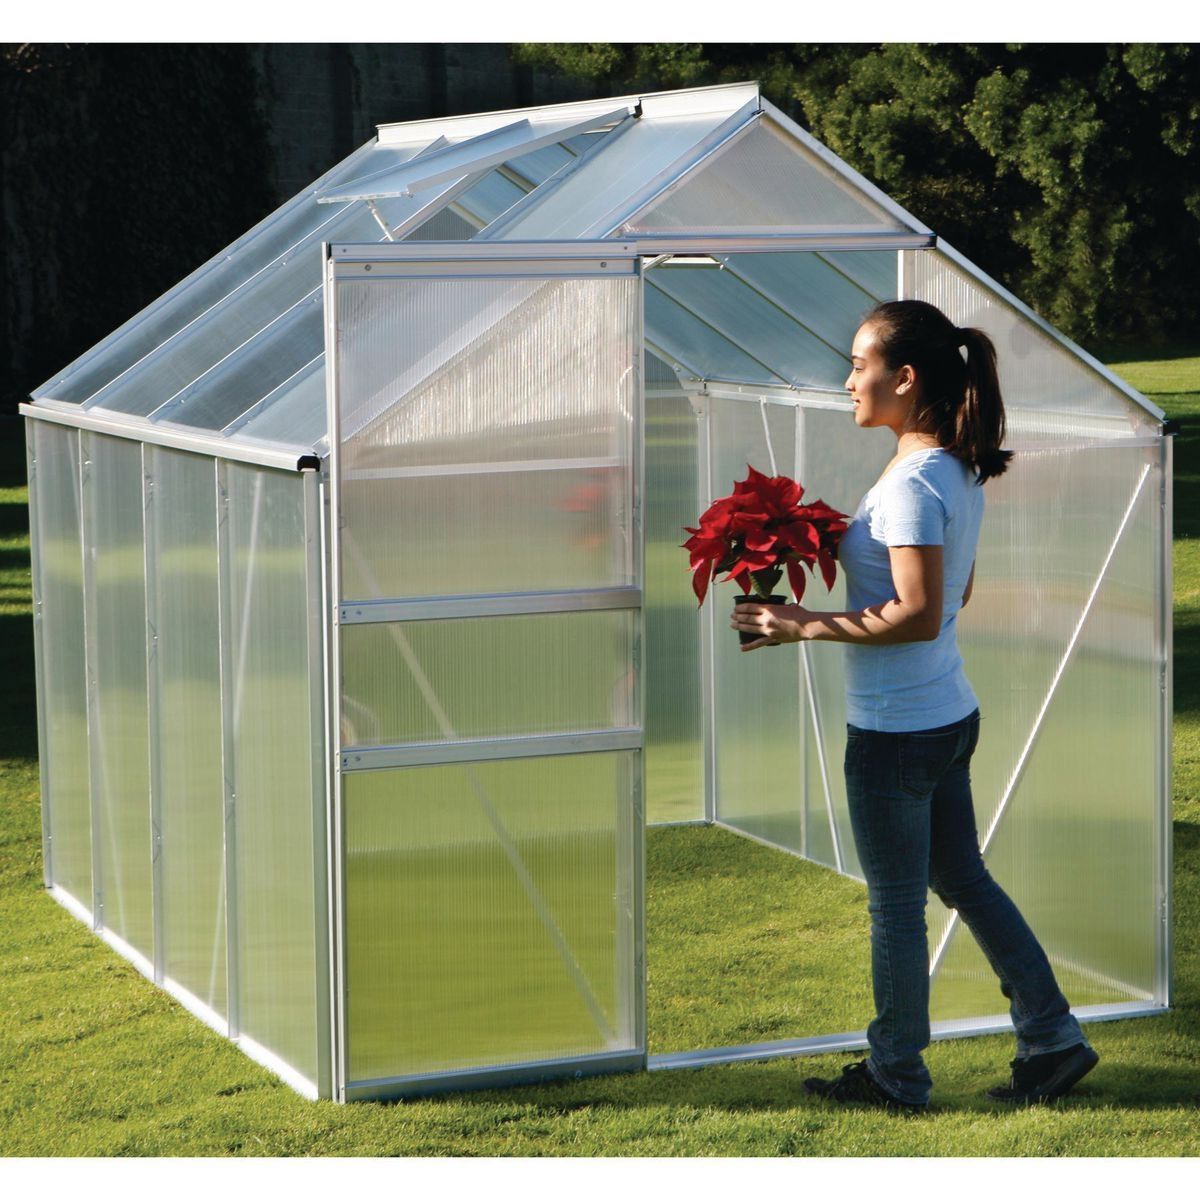 ONE STOP GARDENS Small Greenhouse Kit - 6 Ft. x 8 Ft.